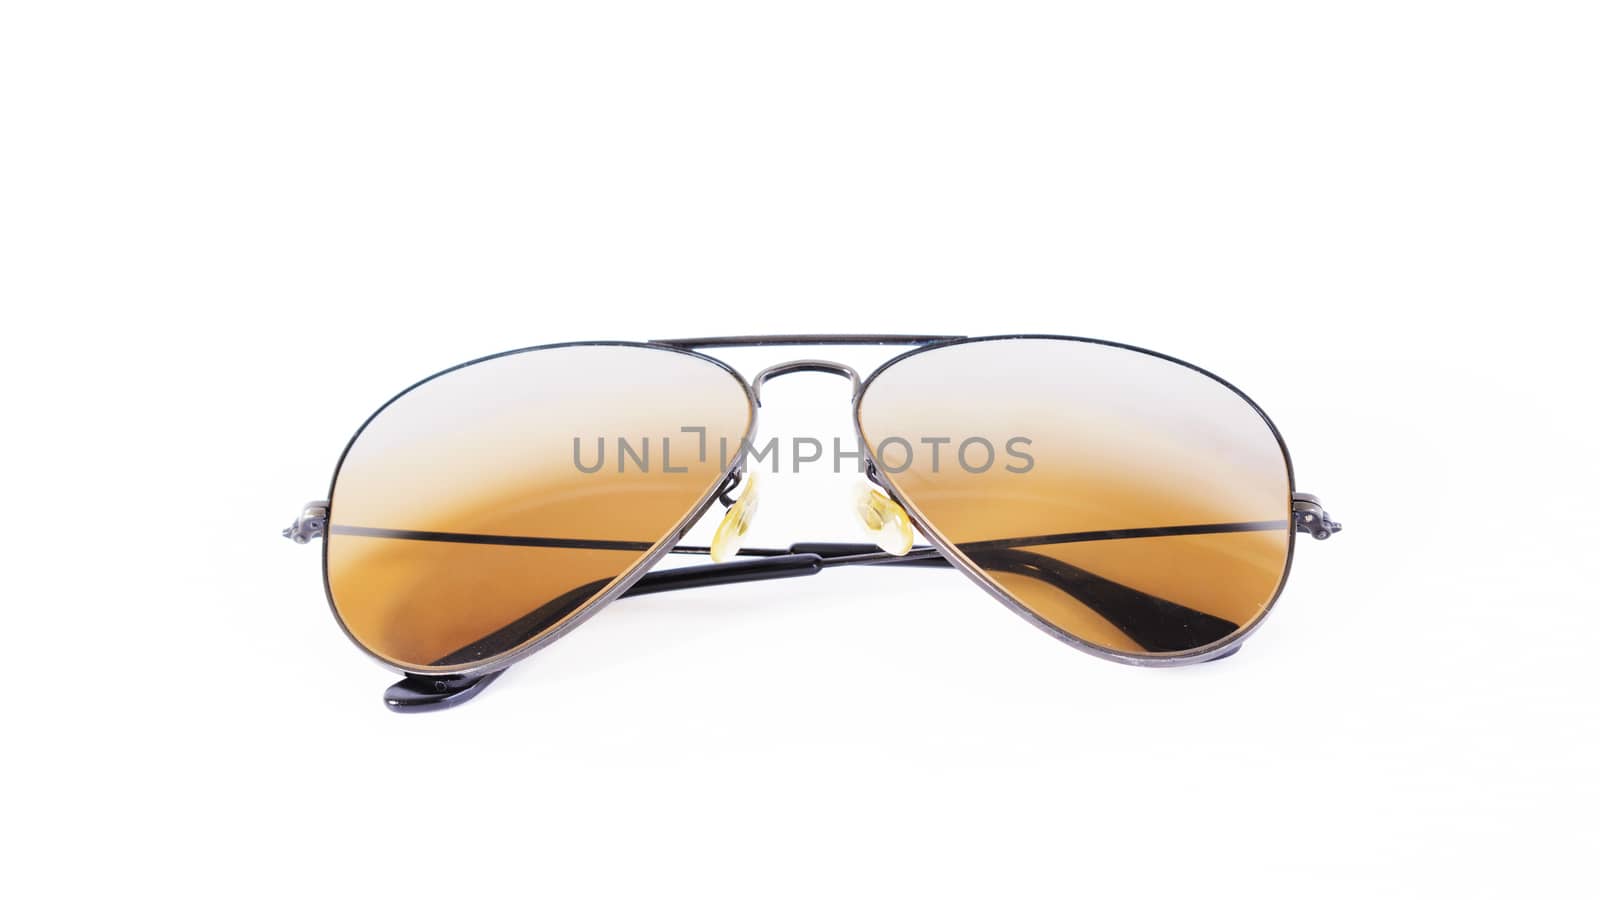 Sunglasses Isolated on white background by Lumpang